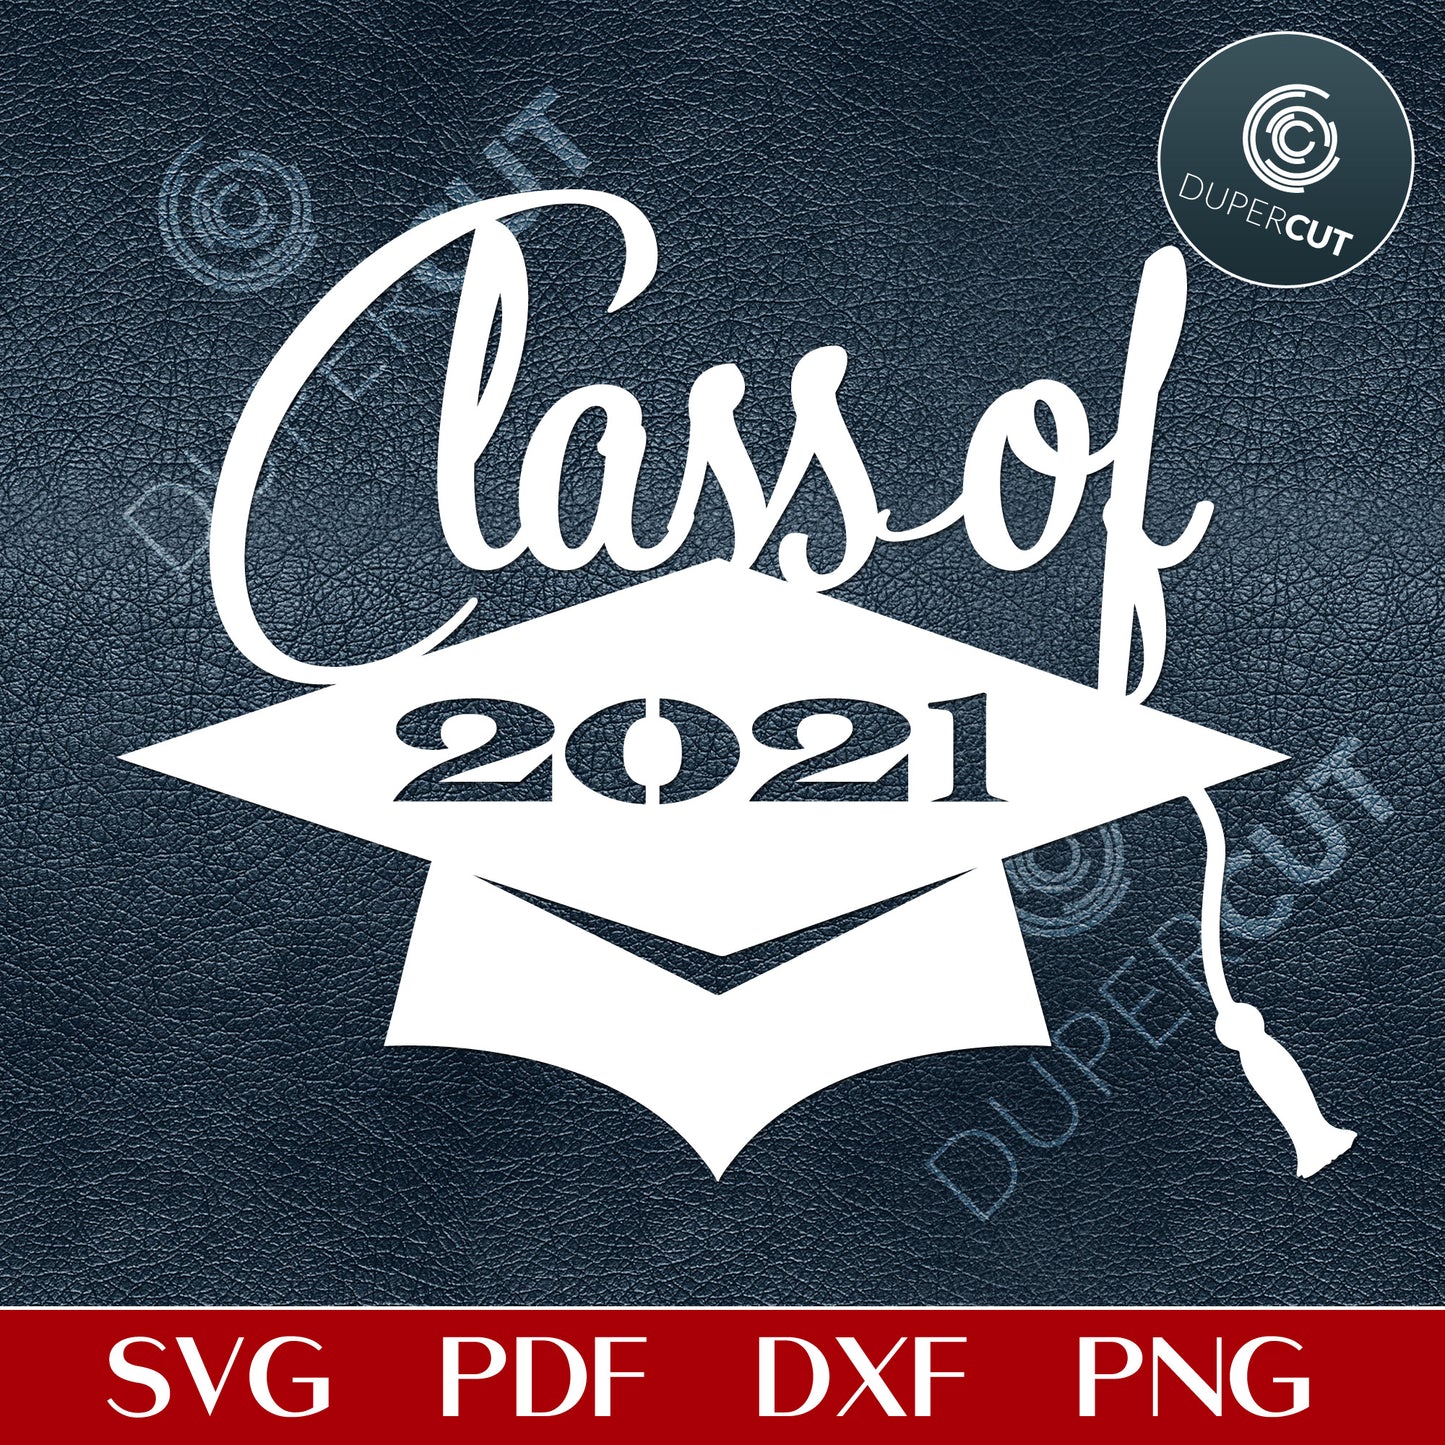 Class of 2021, convocation template, SVG PNG DXF files for cutting, laser engraving, scrapbooking. For use with Cricut, Glowforge, Silhouette, CNC machines.